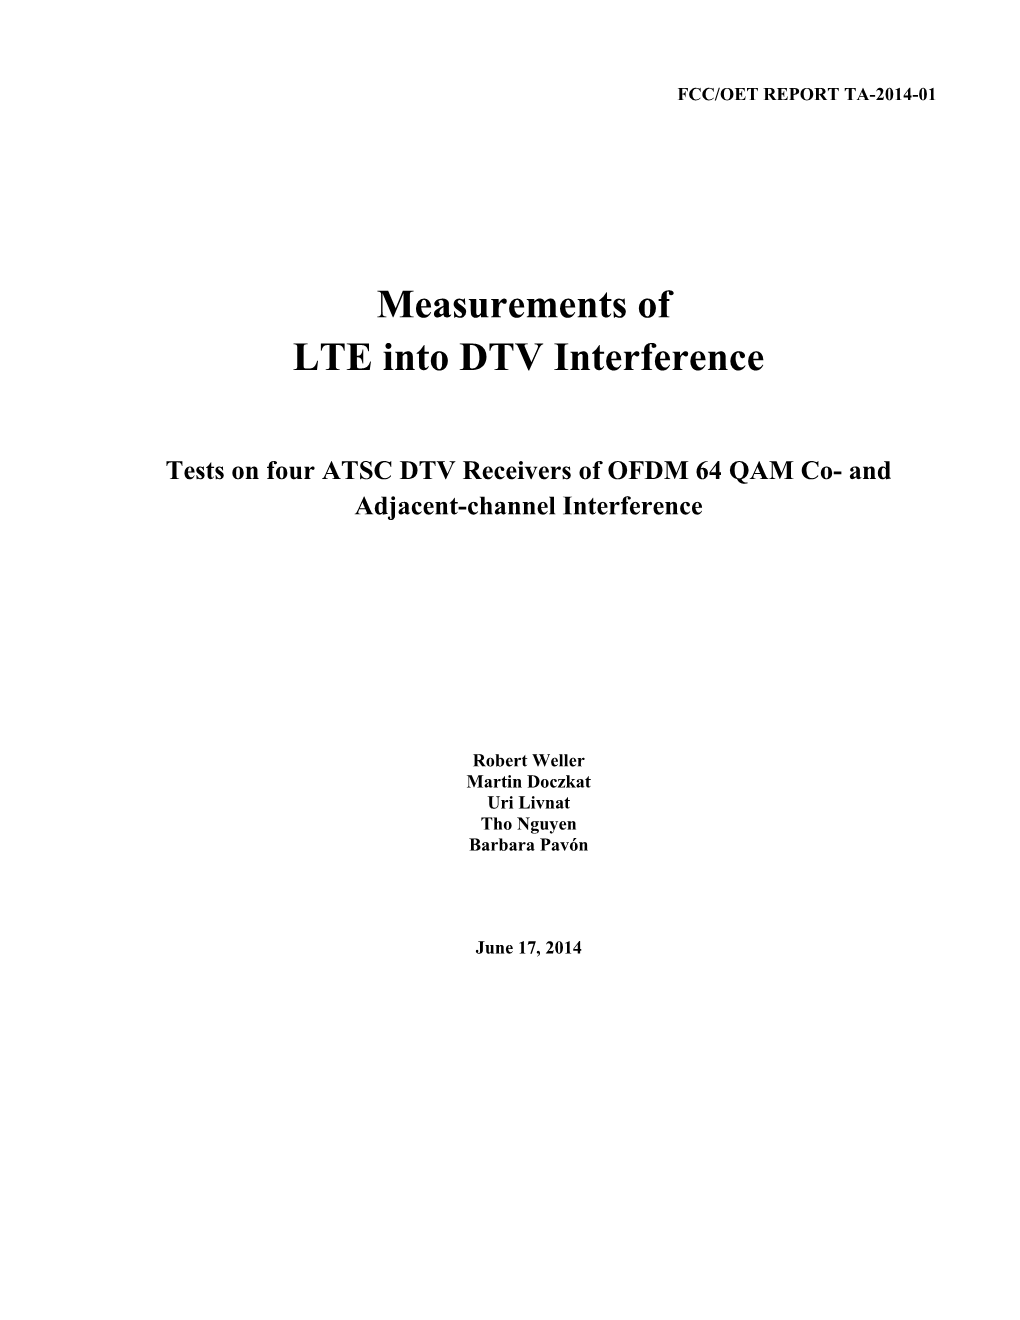 Report TA-2014-01Measurements of LTE to DTV Interference